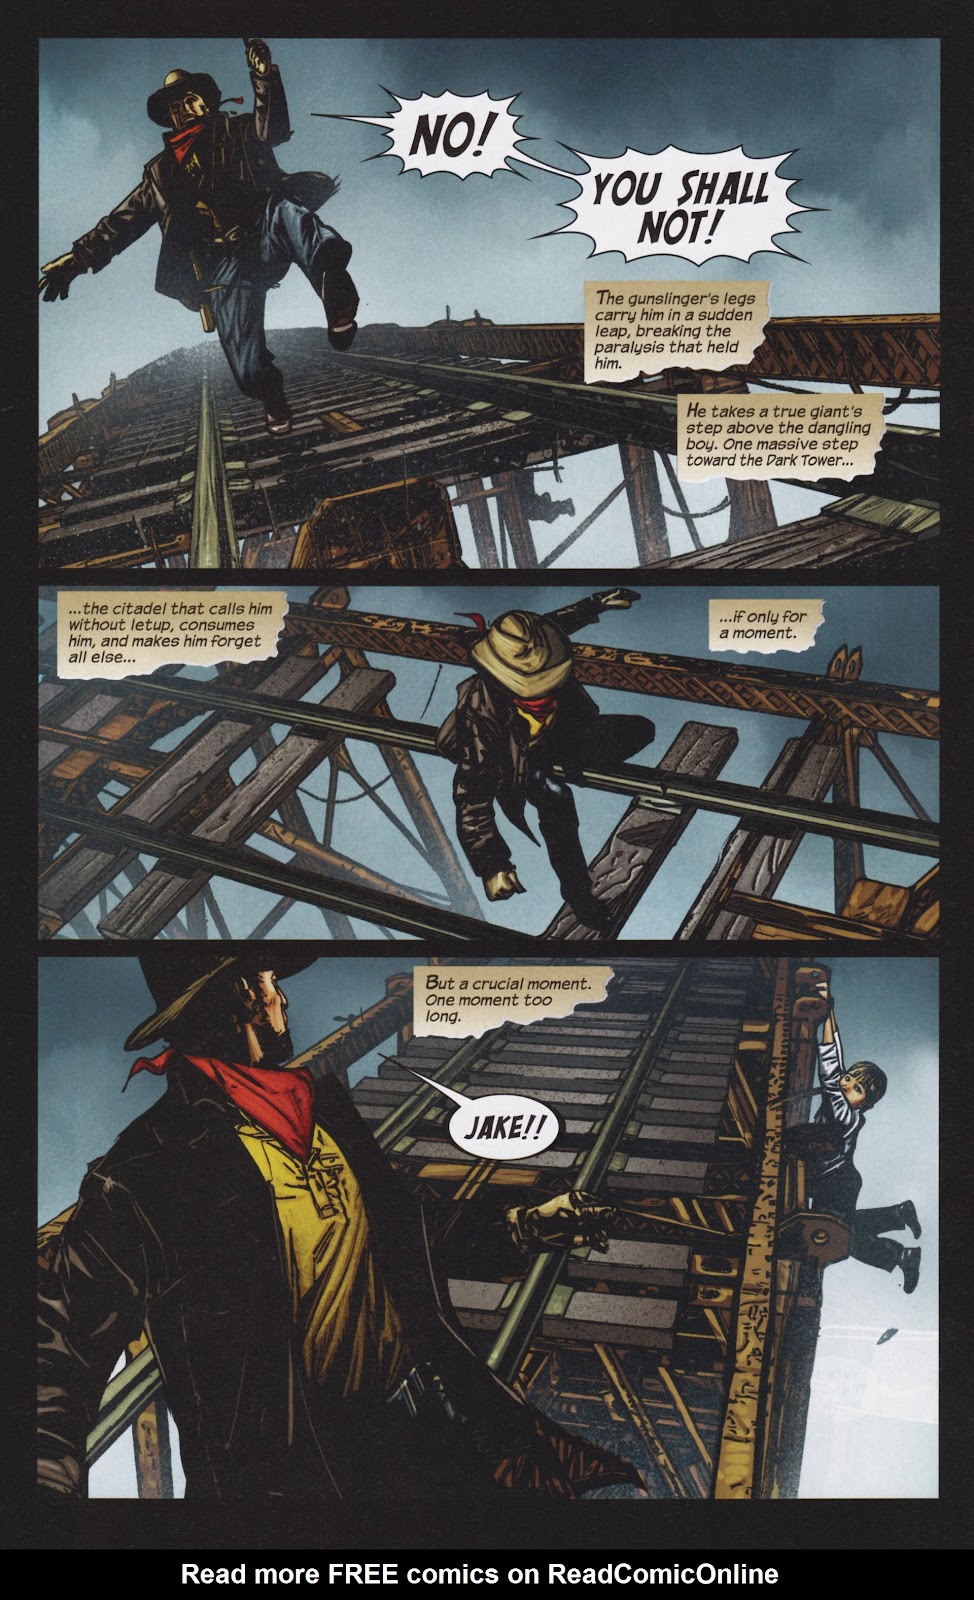 Dark Tower: The Gunslinger - The Man in Black issue 4 - Page 23